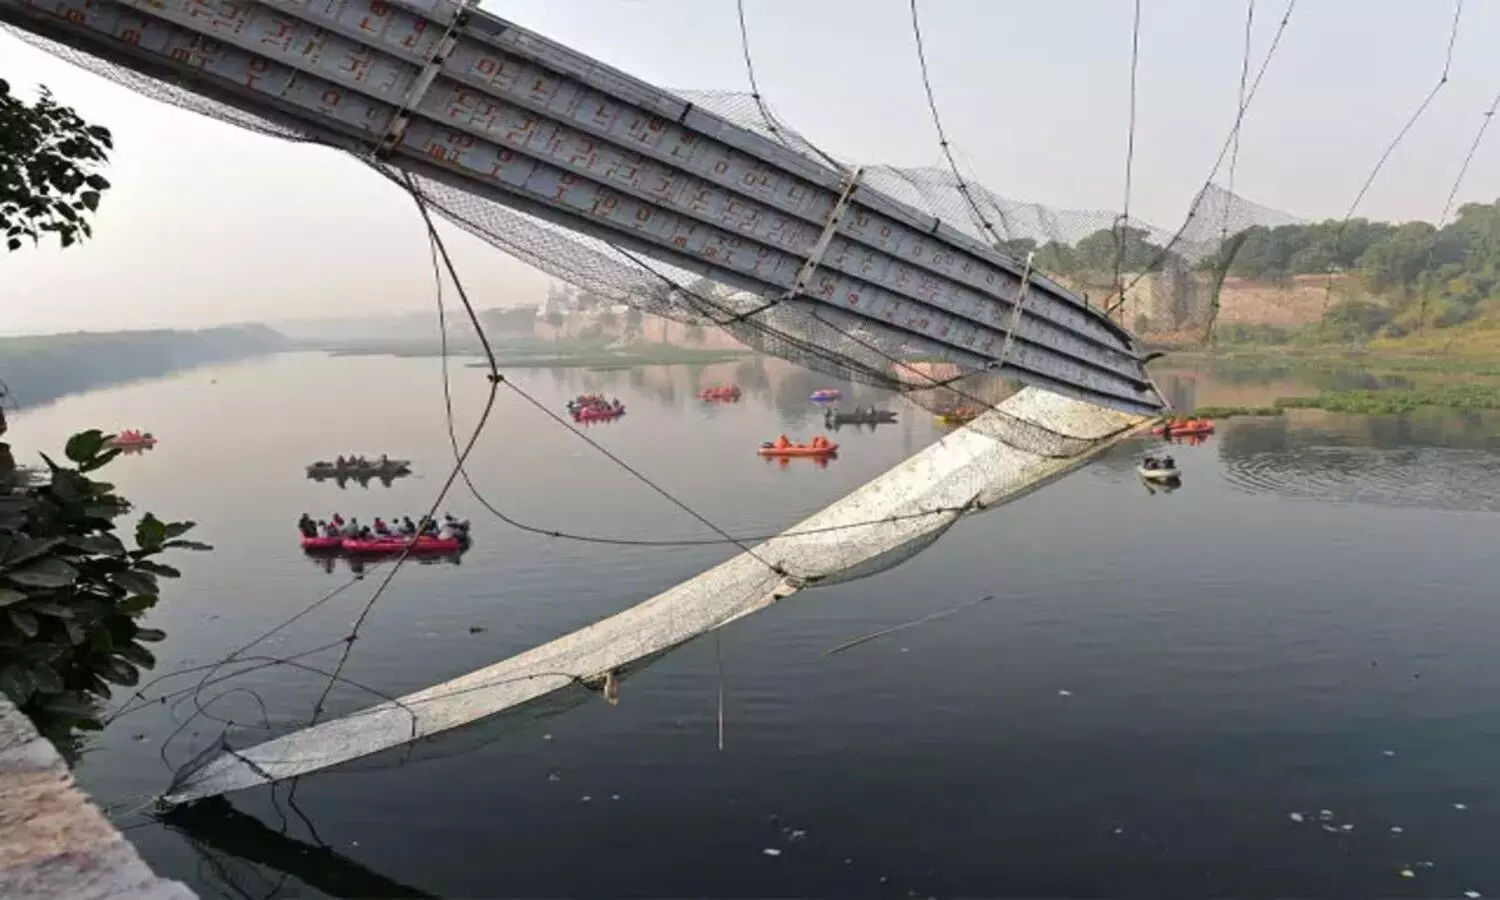 gujarat morbi bridge collapse contractor who repaired were not qualified prosecution tells court